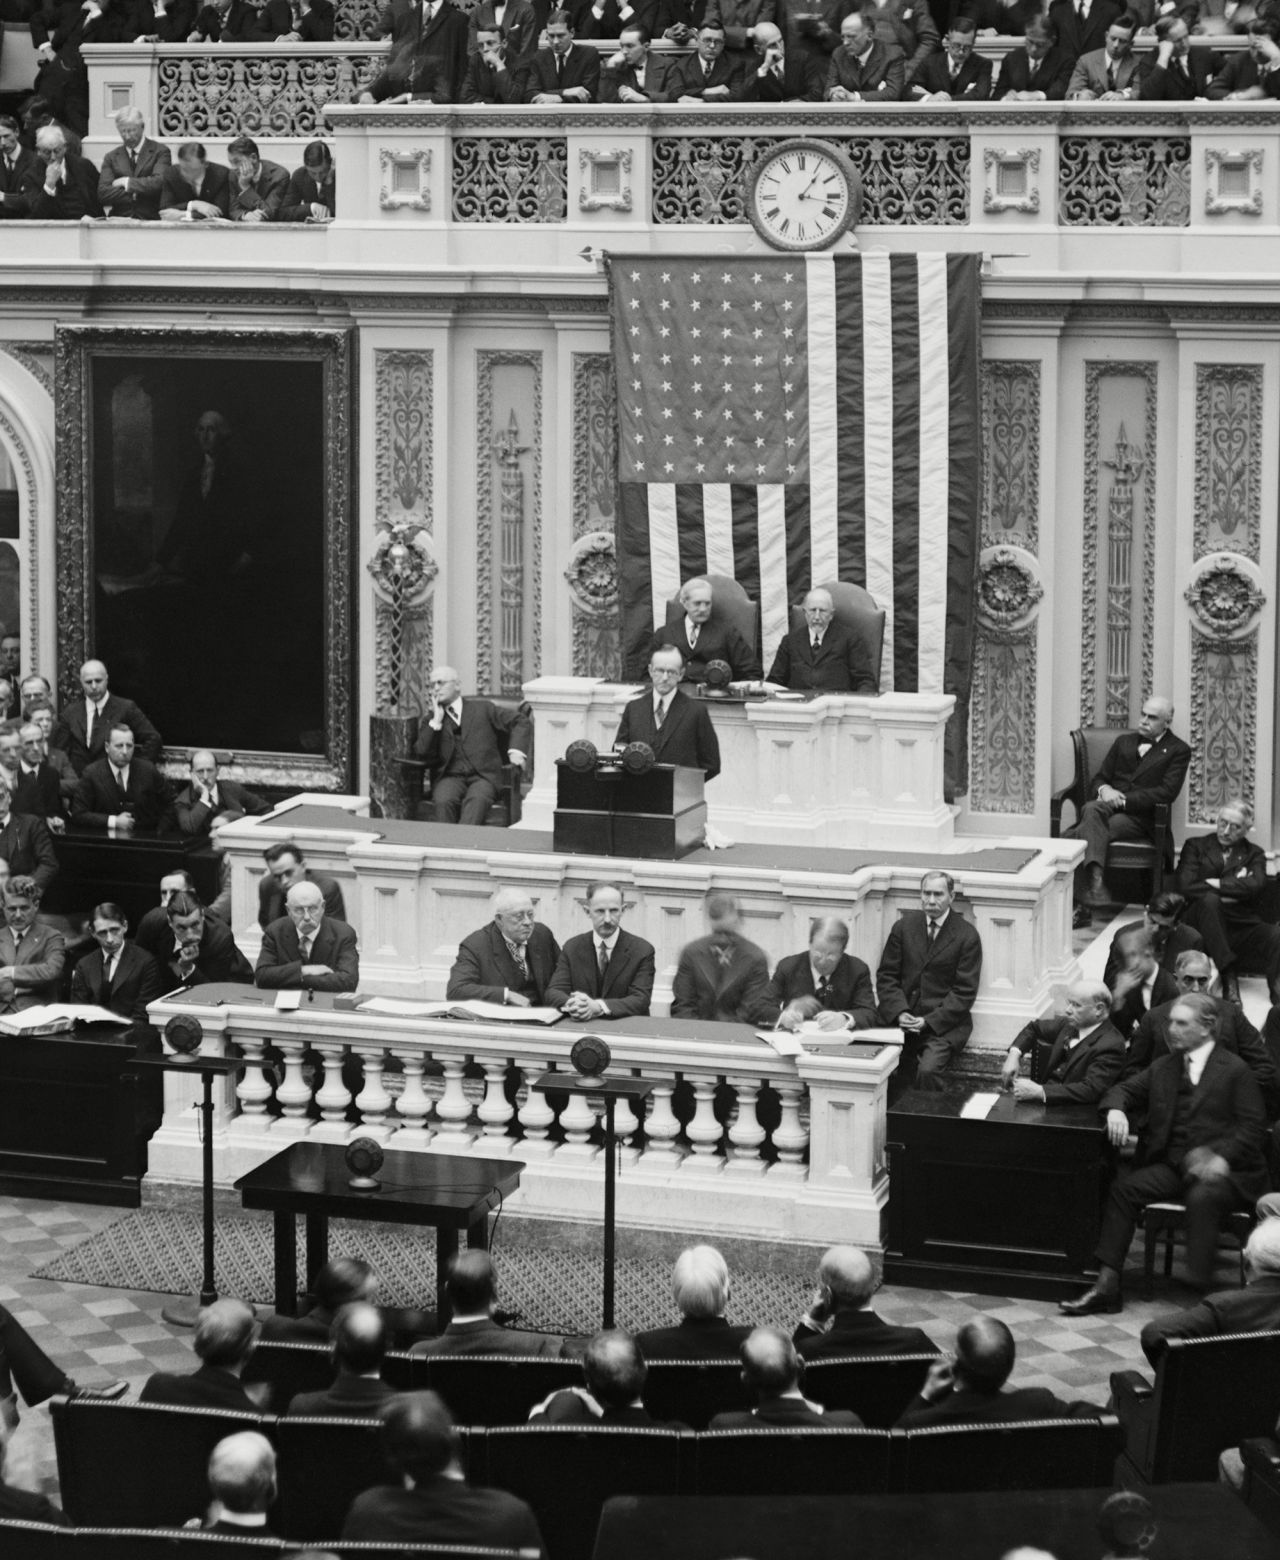 President Calvin Coolidge delivers his first annual message to Congress in 1923. Coolidge's address was the first to be broadcast to the nation via radio.